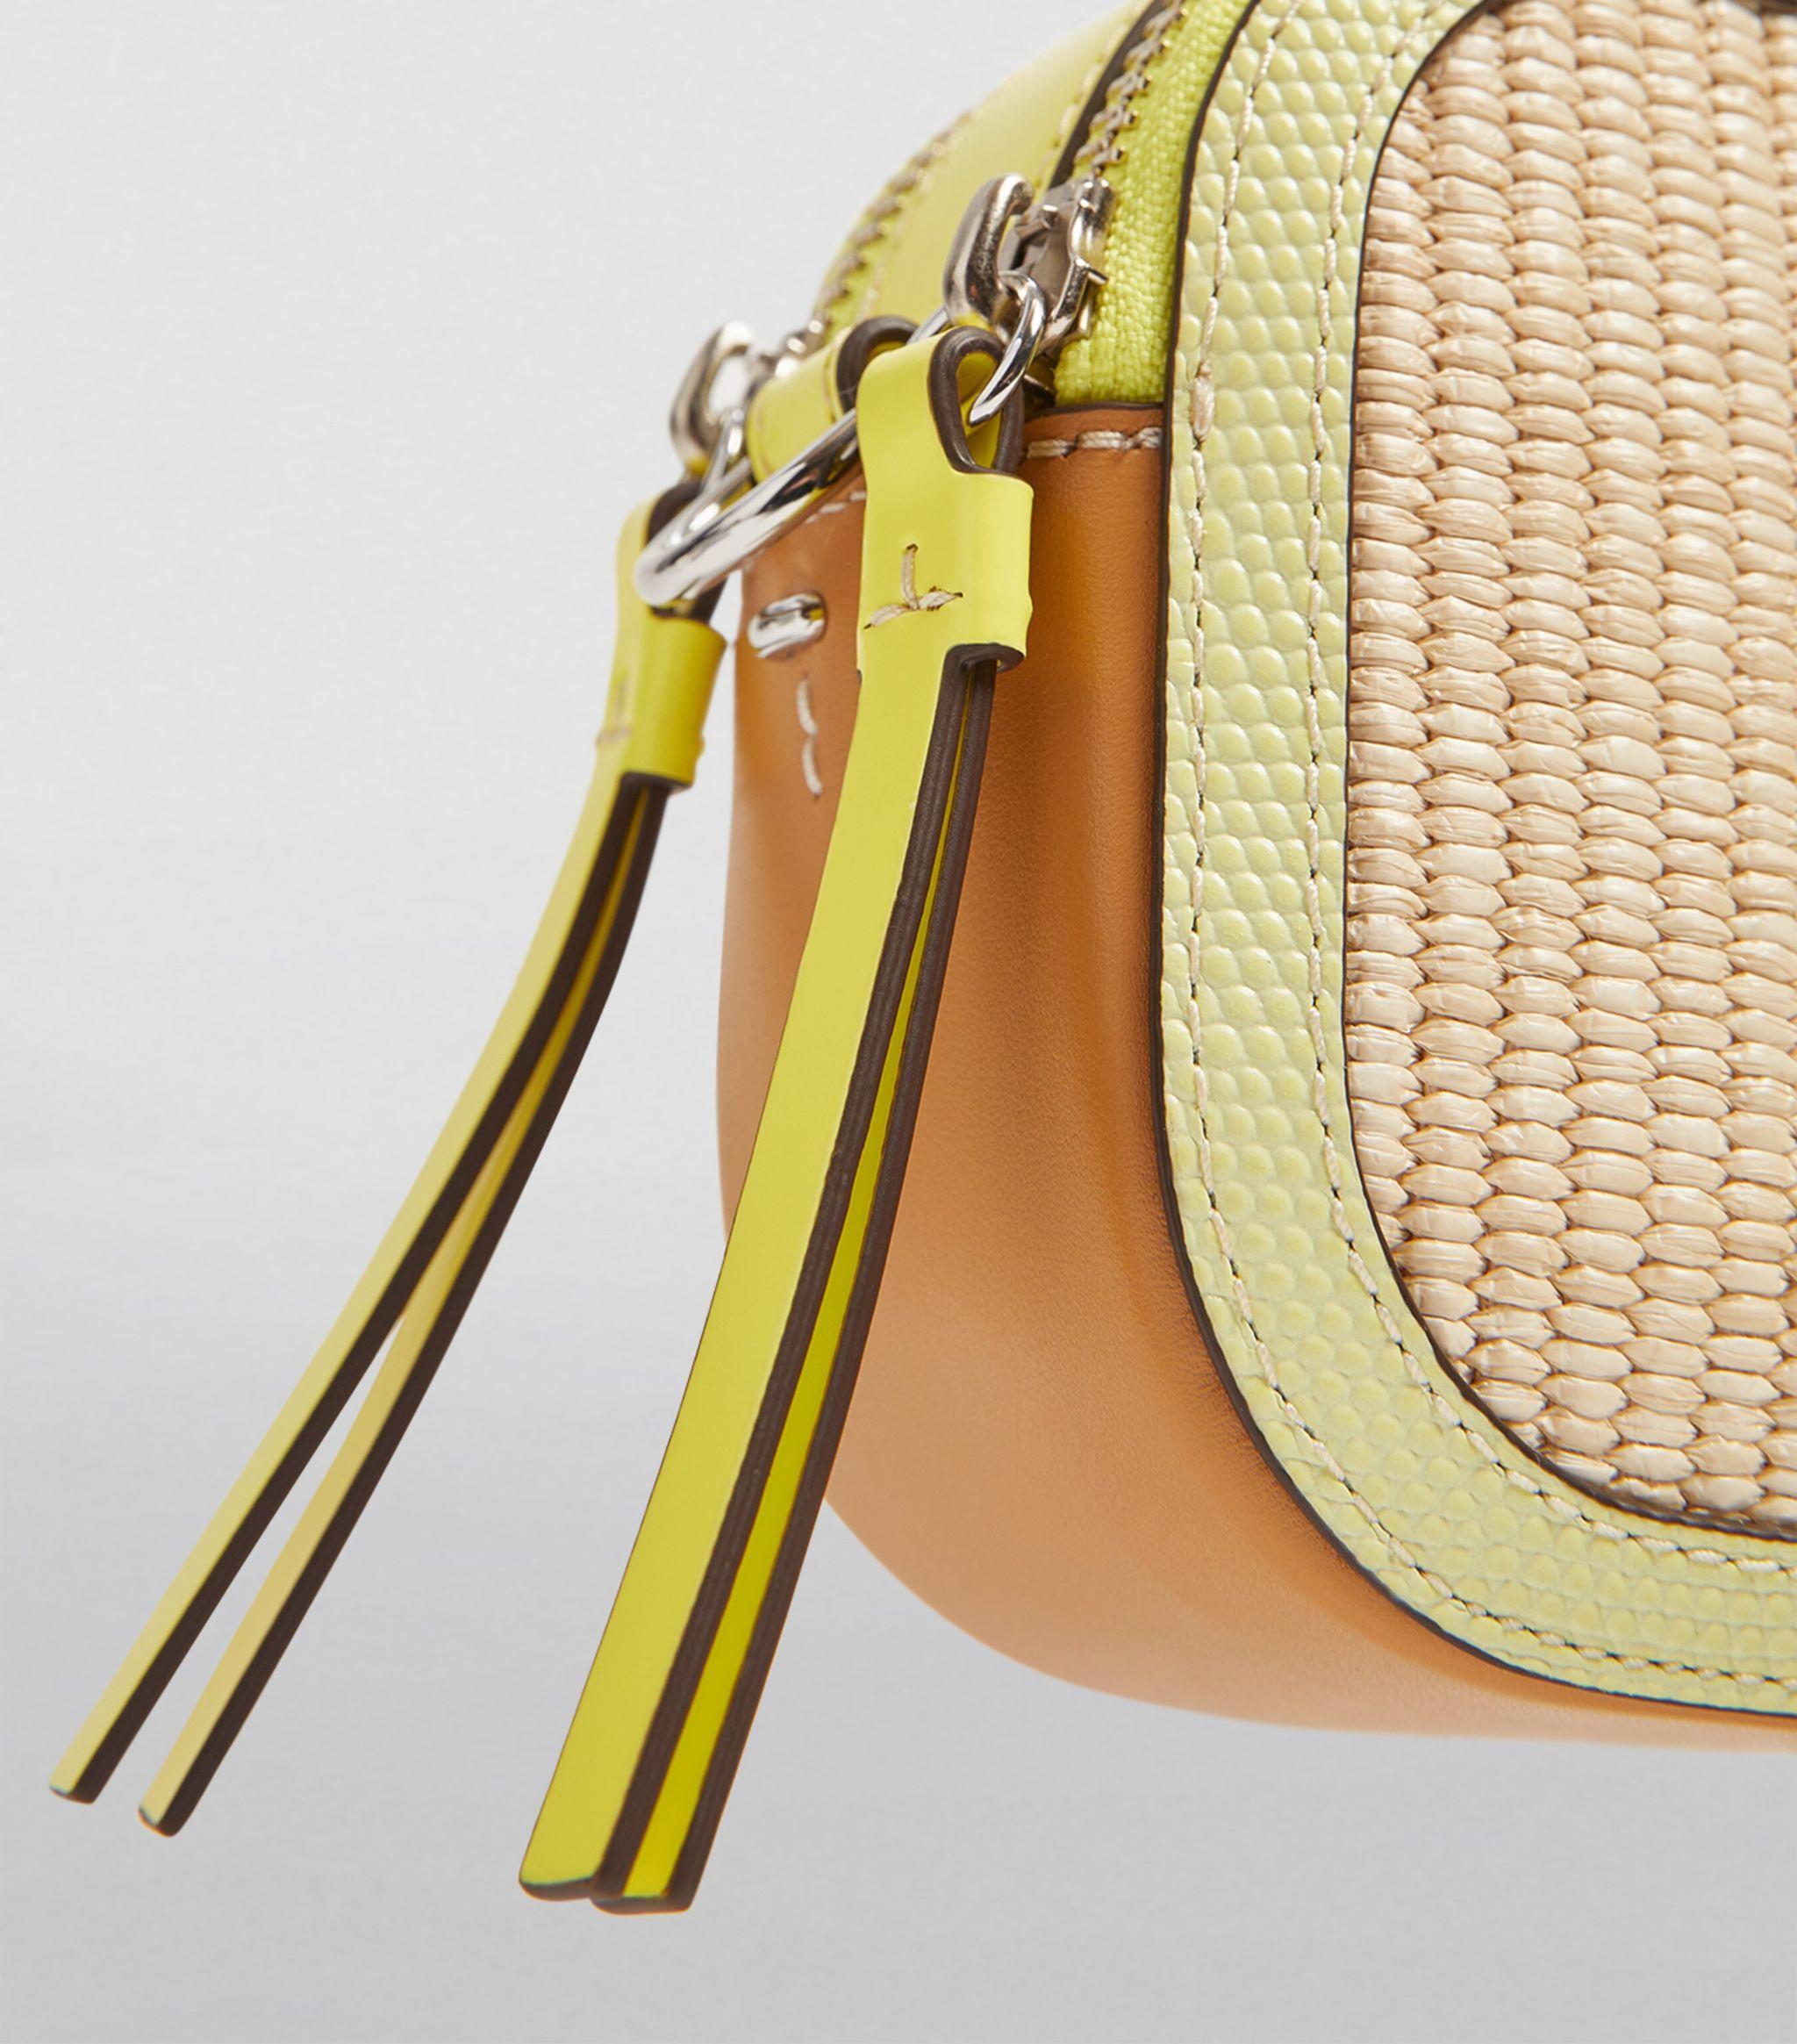 Tory Burch - On the Runway Our Miller Straw Cross-Body Bag Shop